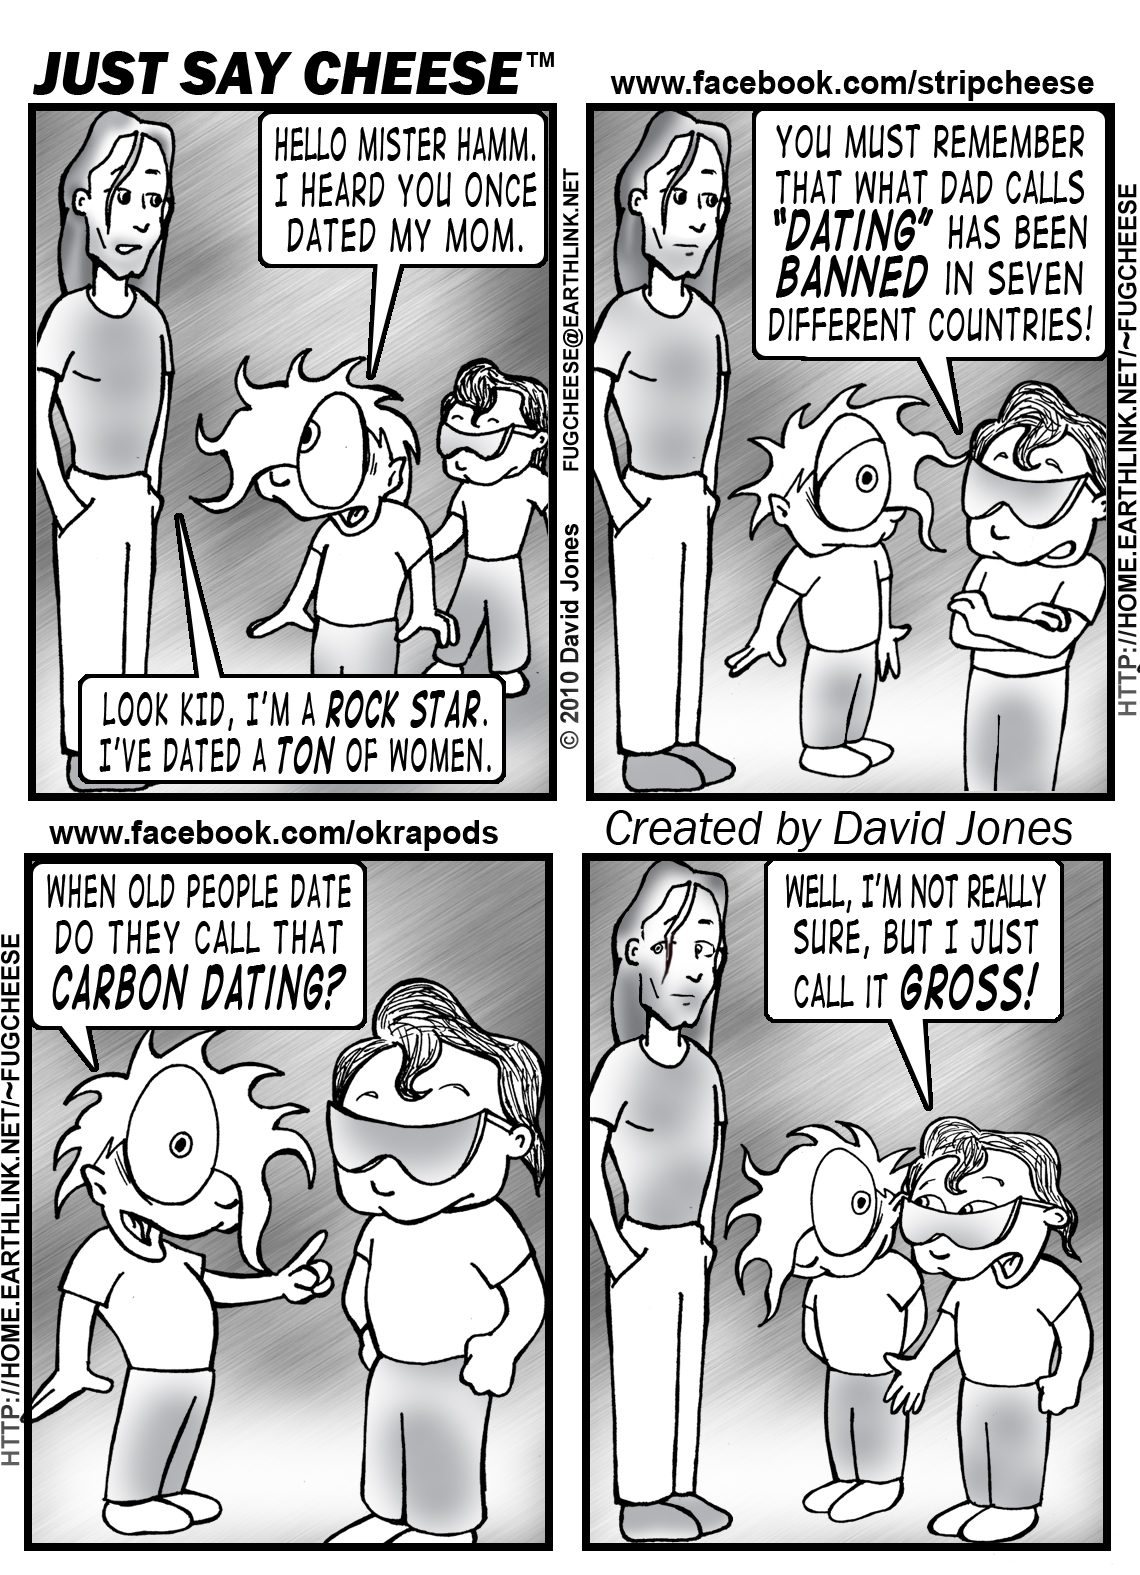 Here is a strip from last week!  Just Say Cheese is my new, cutting edge comic strip!

Follow the adventures...
www.facebook.com/stripcheese
or
fugcheese.wordpress.com